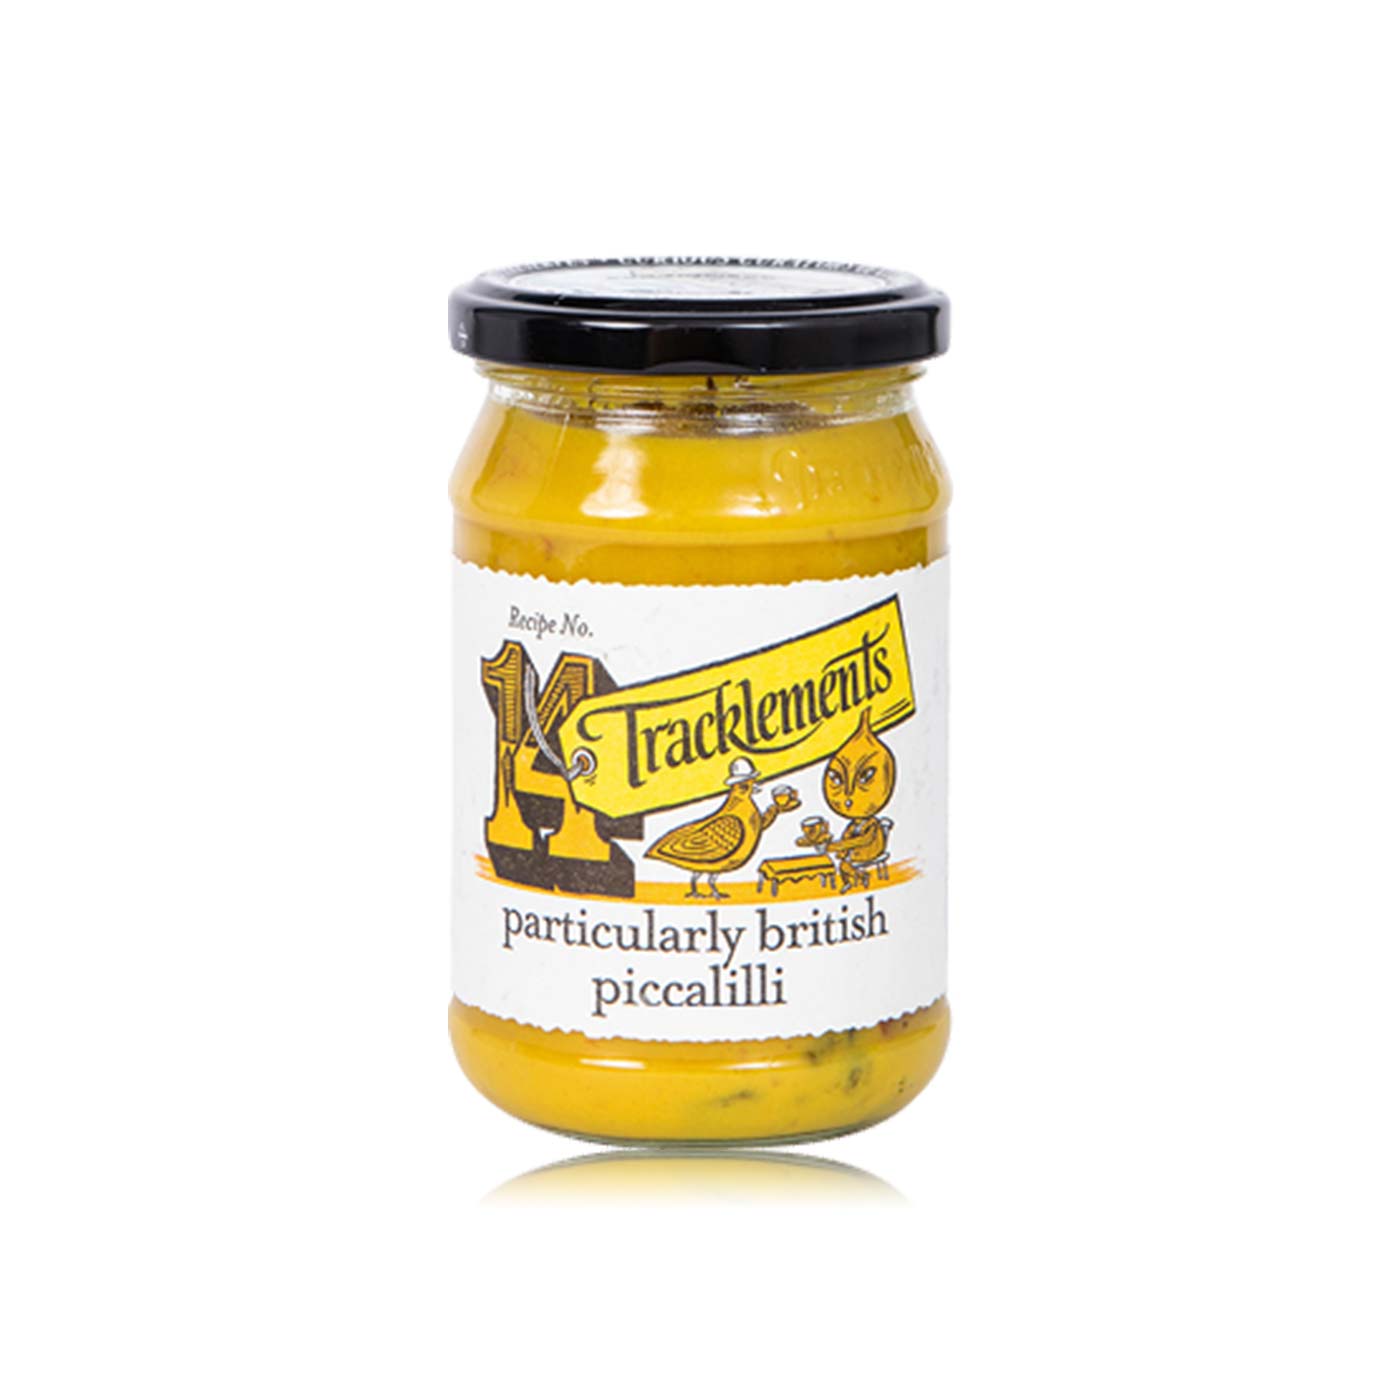 Tracklements particularly British piccalilli 270g - Spinneys UAE